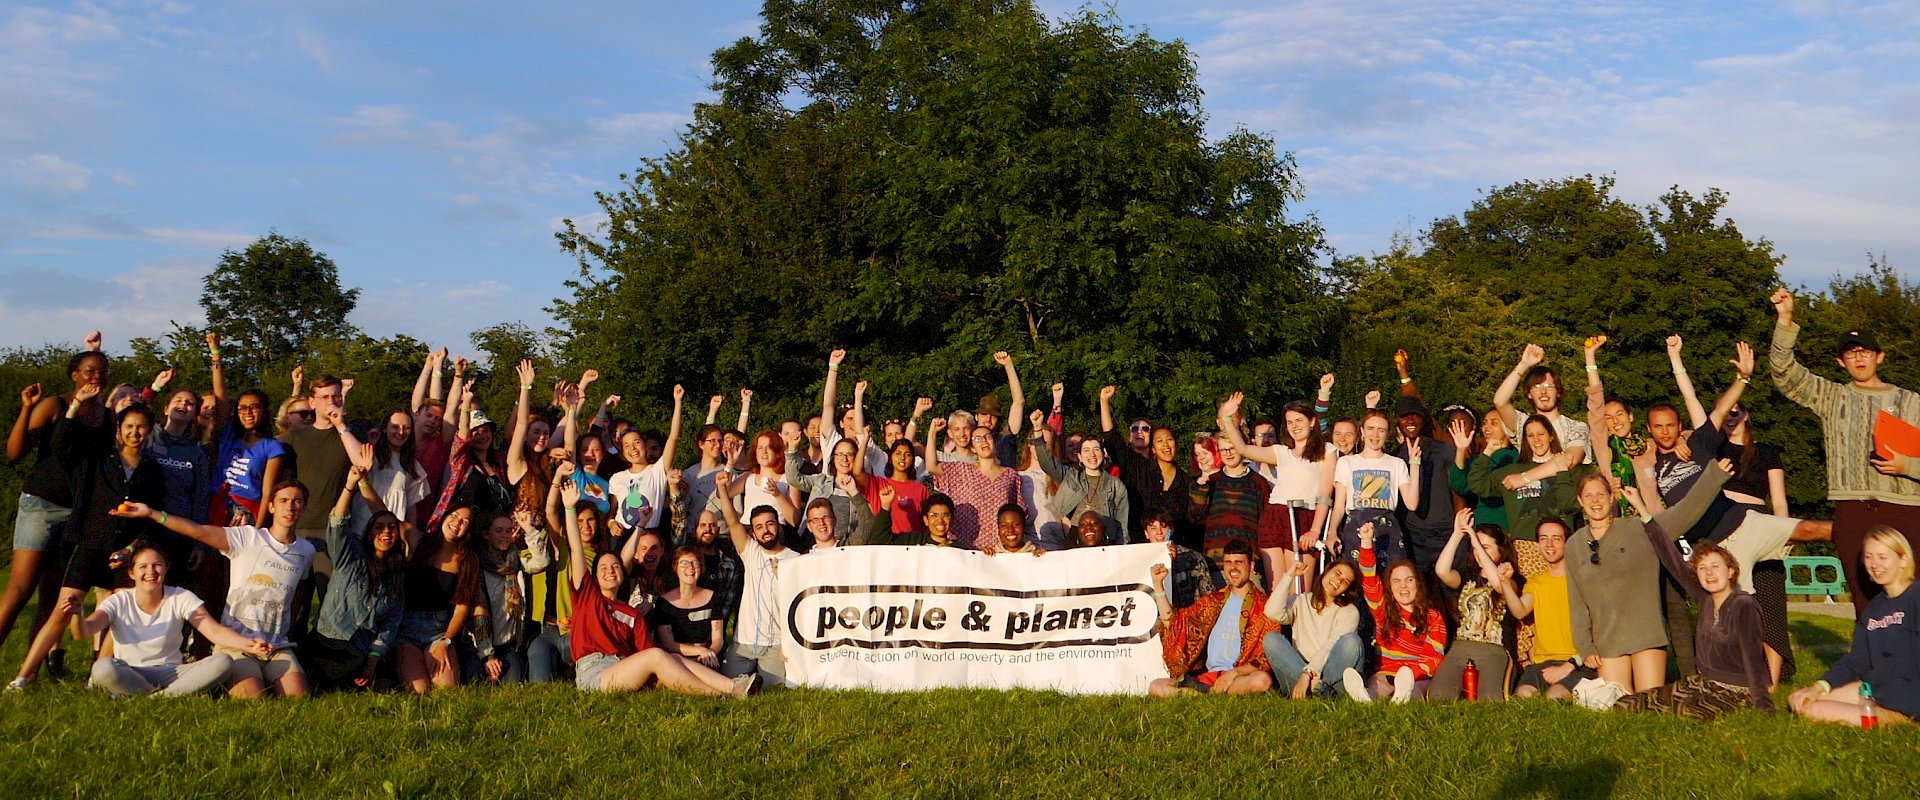 Photo of a hundred or so young people holding fists in the air at an outdoors training event called Power Shift, behind a People & Planet banner.